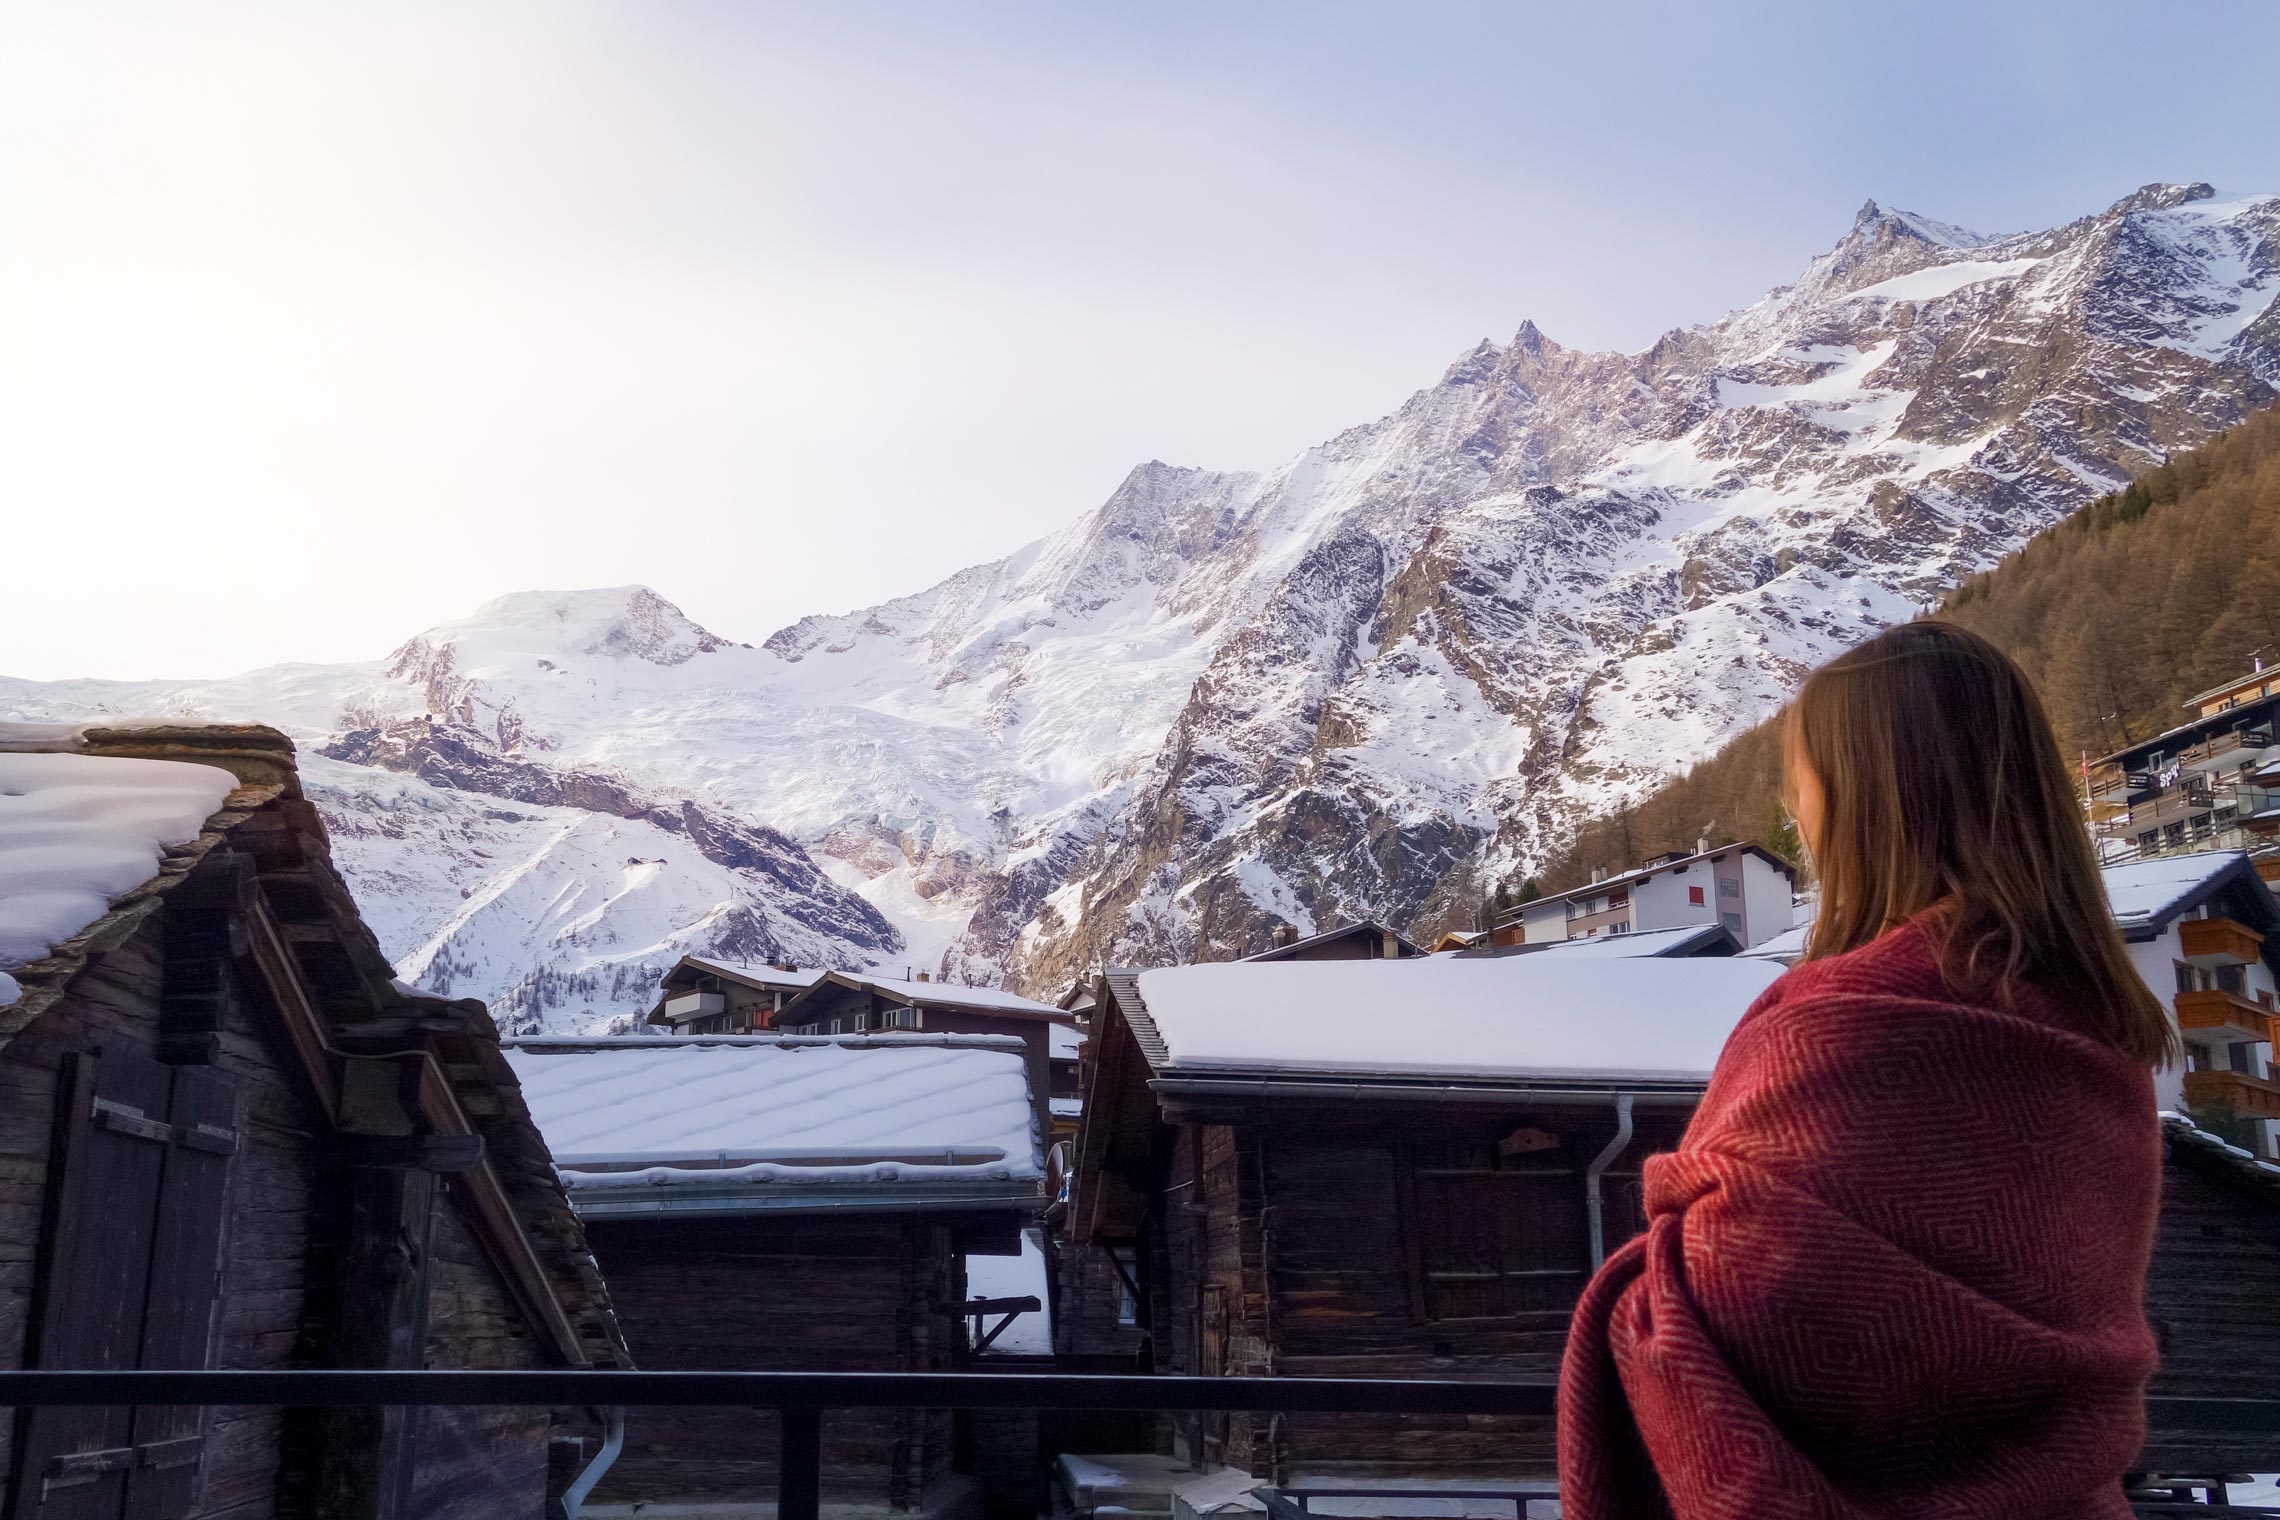 Travelling to Europe in Winter? Here's 10 Things You Should Know